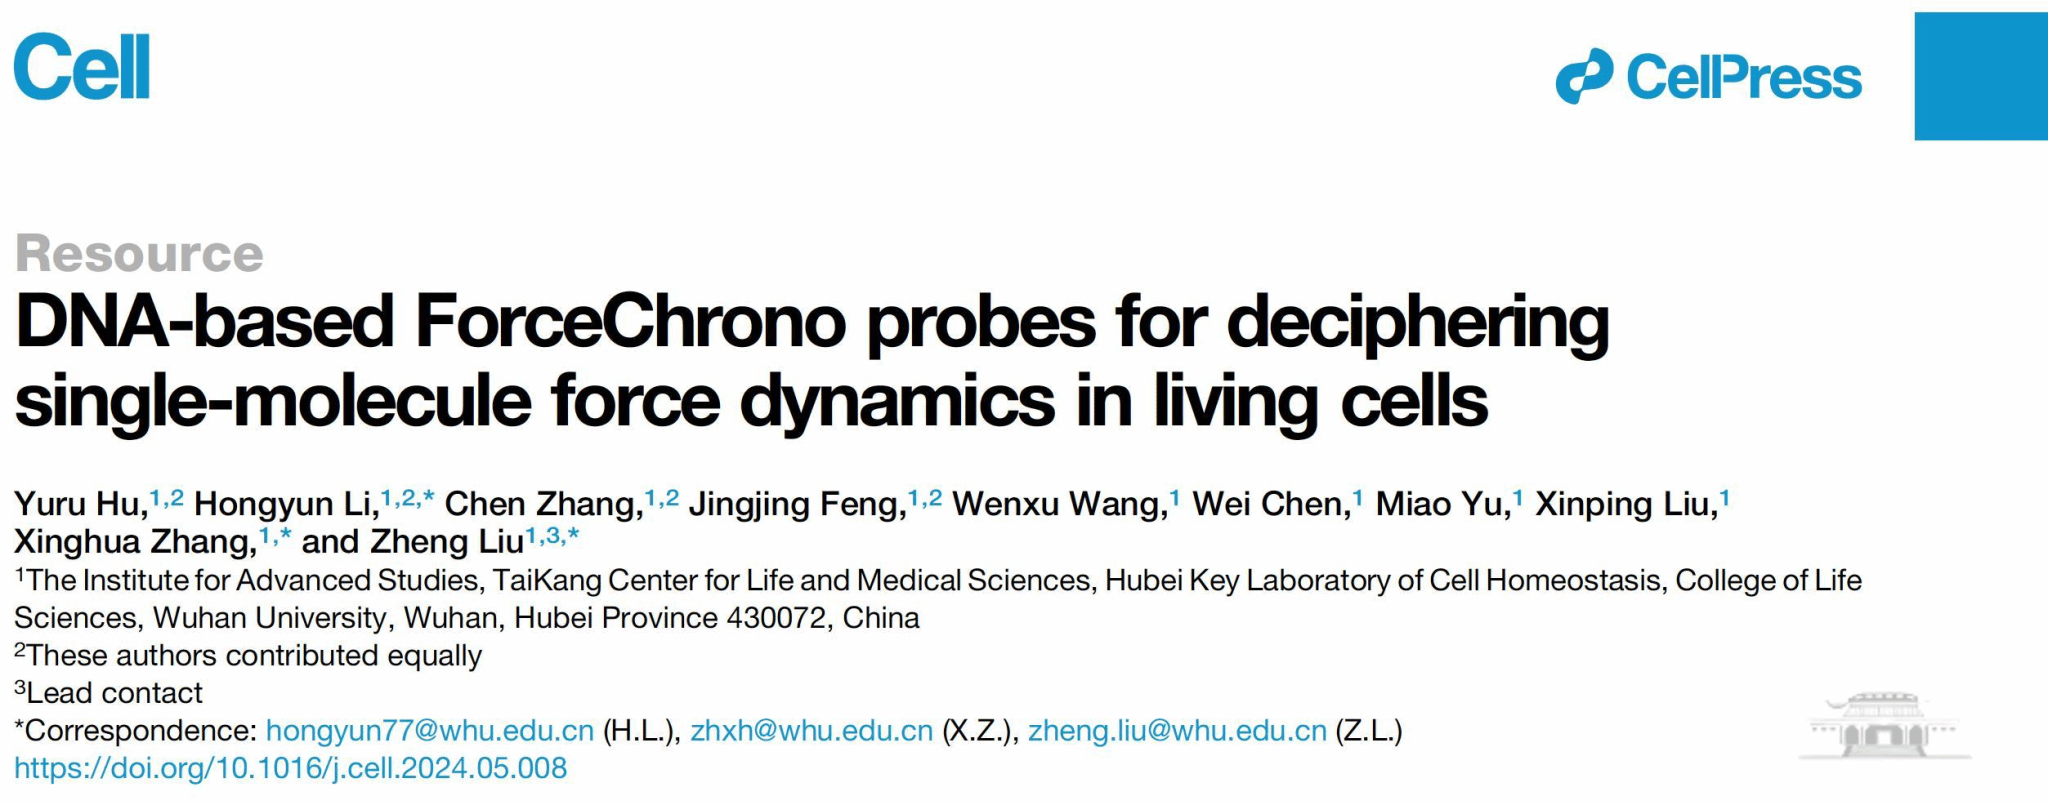 Cell publishes paper on deciphering cellular mechanics for temporal information by Liu Zheng’s and Zhang Xinghua’s teams